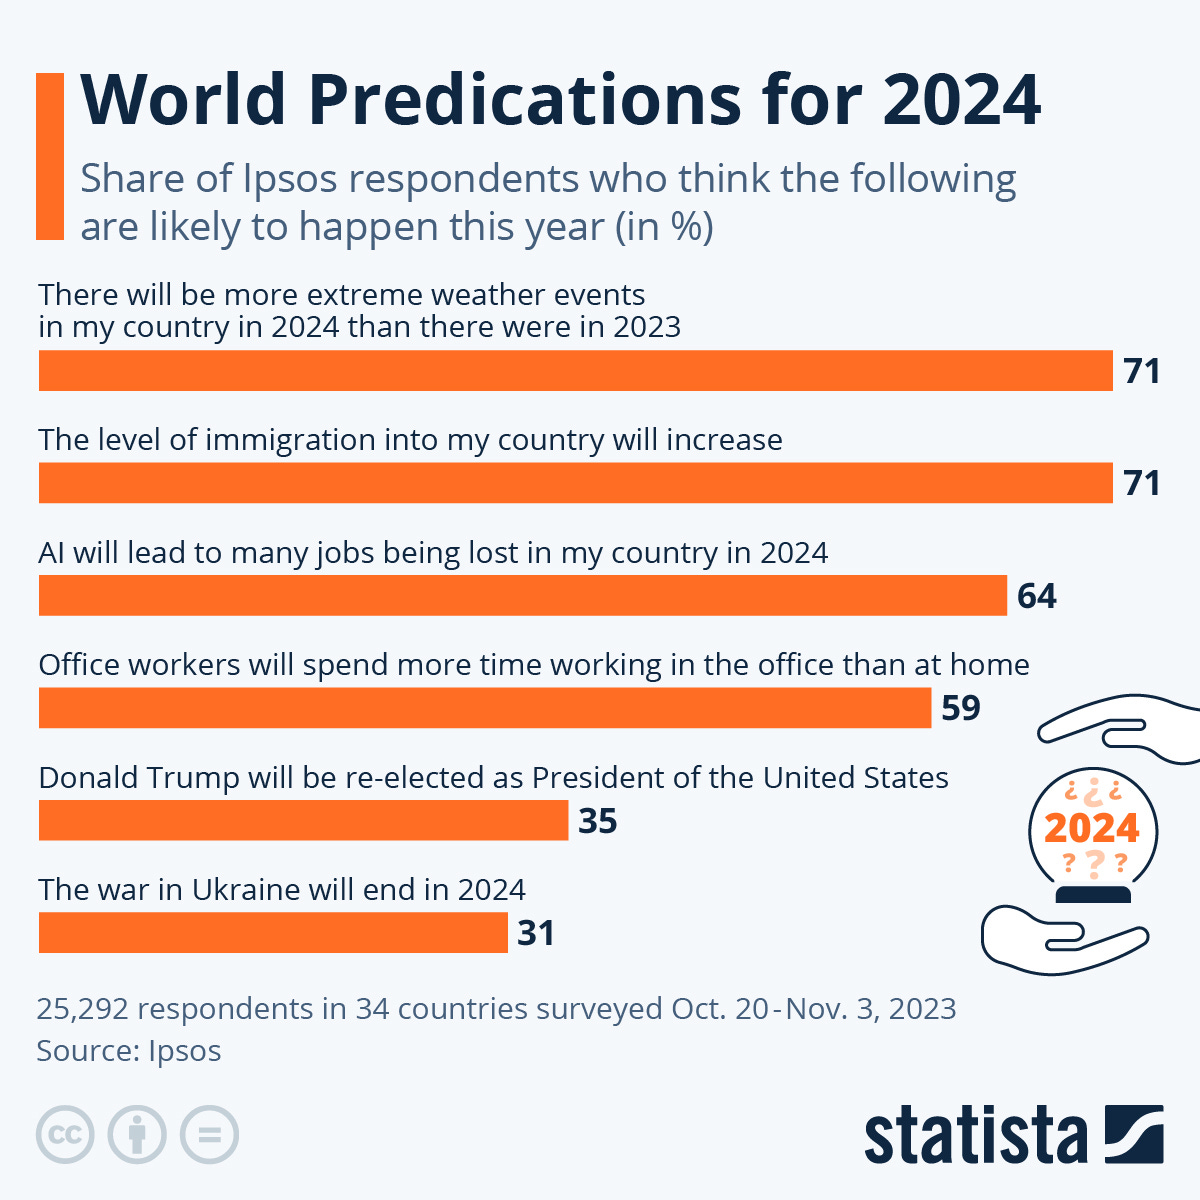 In an Ipsos survey of 25,292 respondents in 34 countries done between October 20 and November 3, 2023, 71 per cent think there will be more extreme weather events in their country in 2024 than there were in 2023 and that the level of immigration in their country will increase. Sixty-four per cent predict AI will lead to many jobs being lost in their country, 59 per cent think office workers will spend more time working in the office than at home, and 31 per cent think the war in Ukraine will end in 2024. (Source: Ipsos)